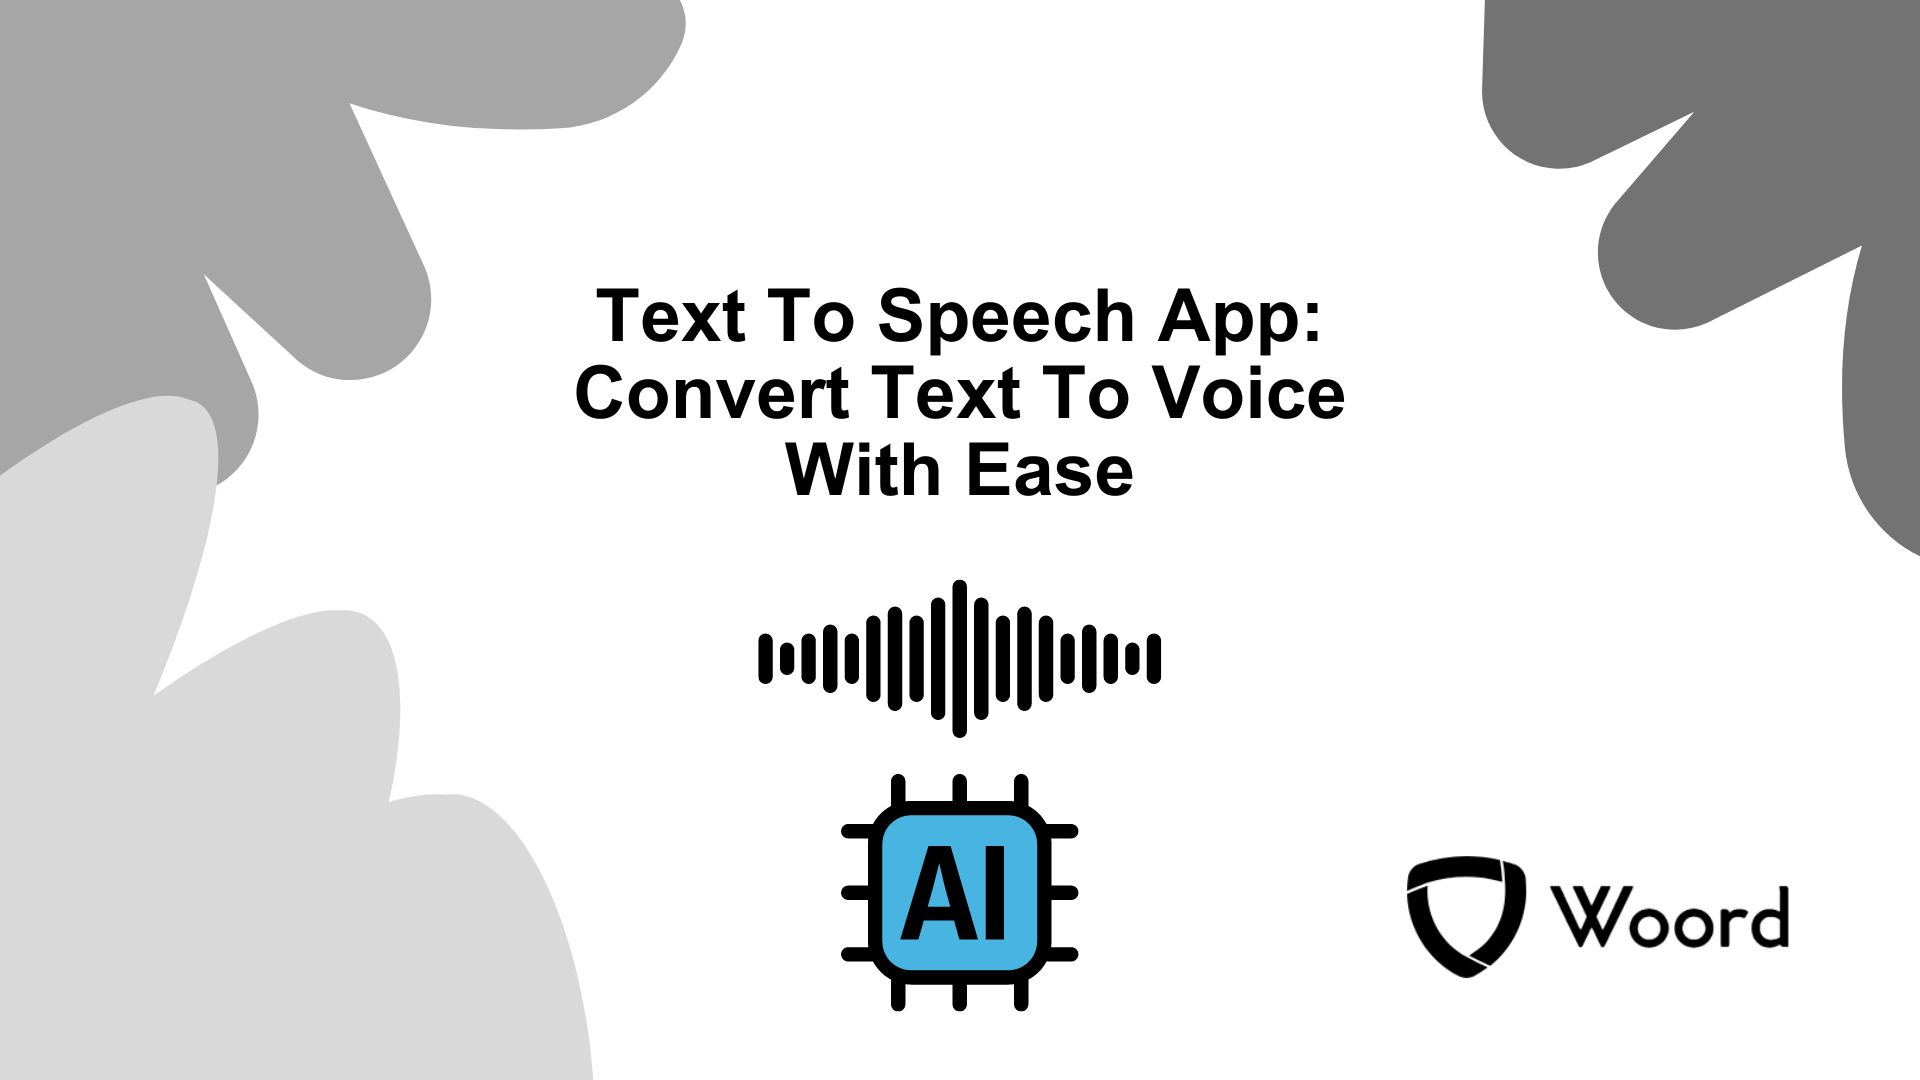 Text To Speech App: Convert Text To Voice With Ease